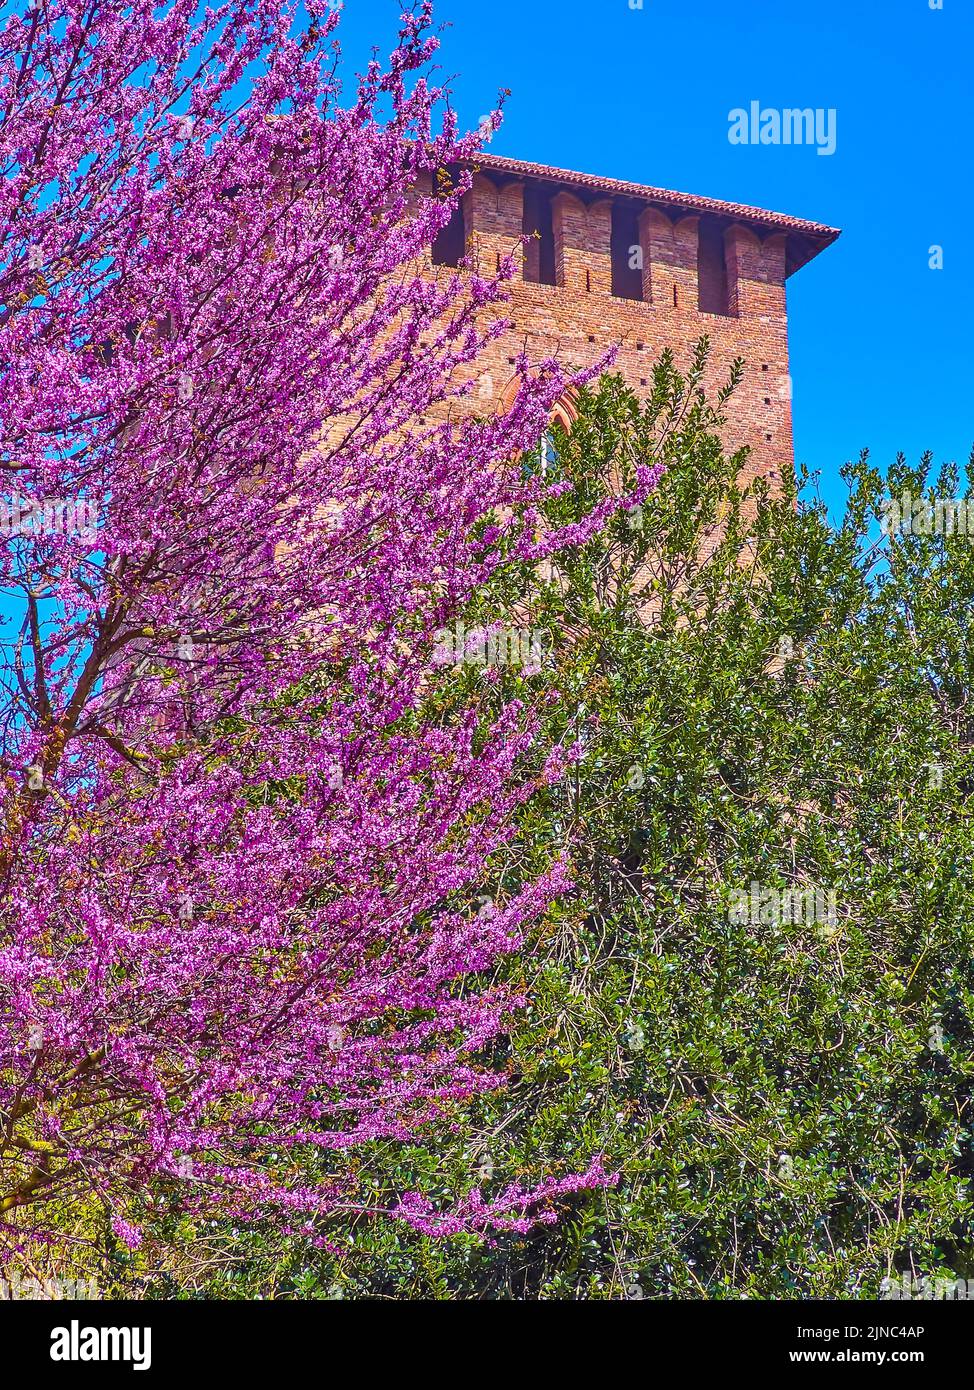 The pink flowers of Cornus Florida tree and the tower of Visconti Castle, Pavia, Italy Stock Photo